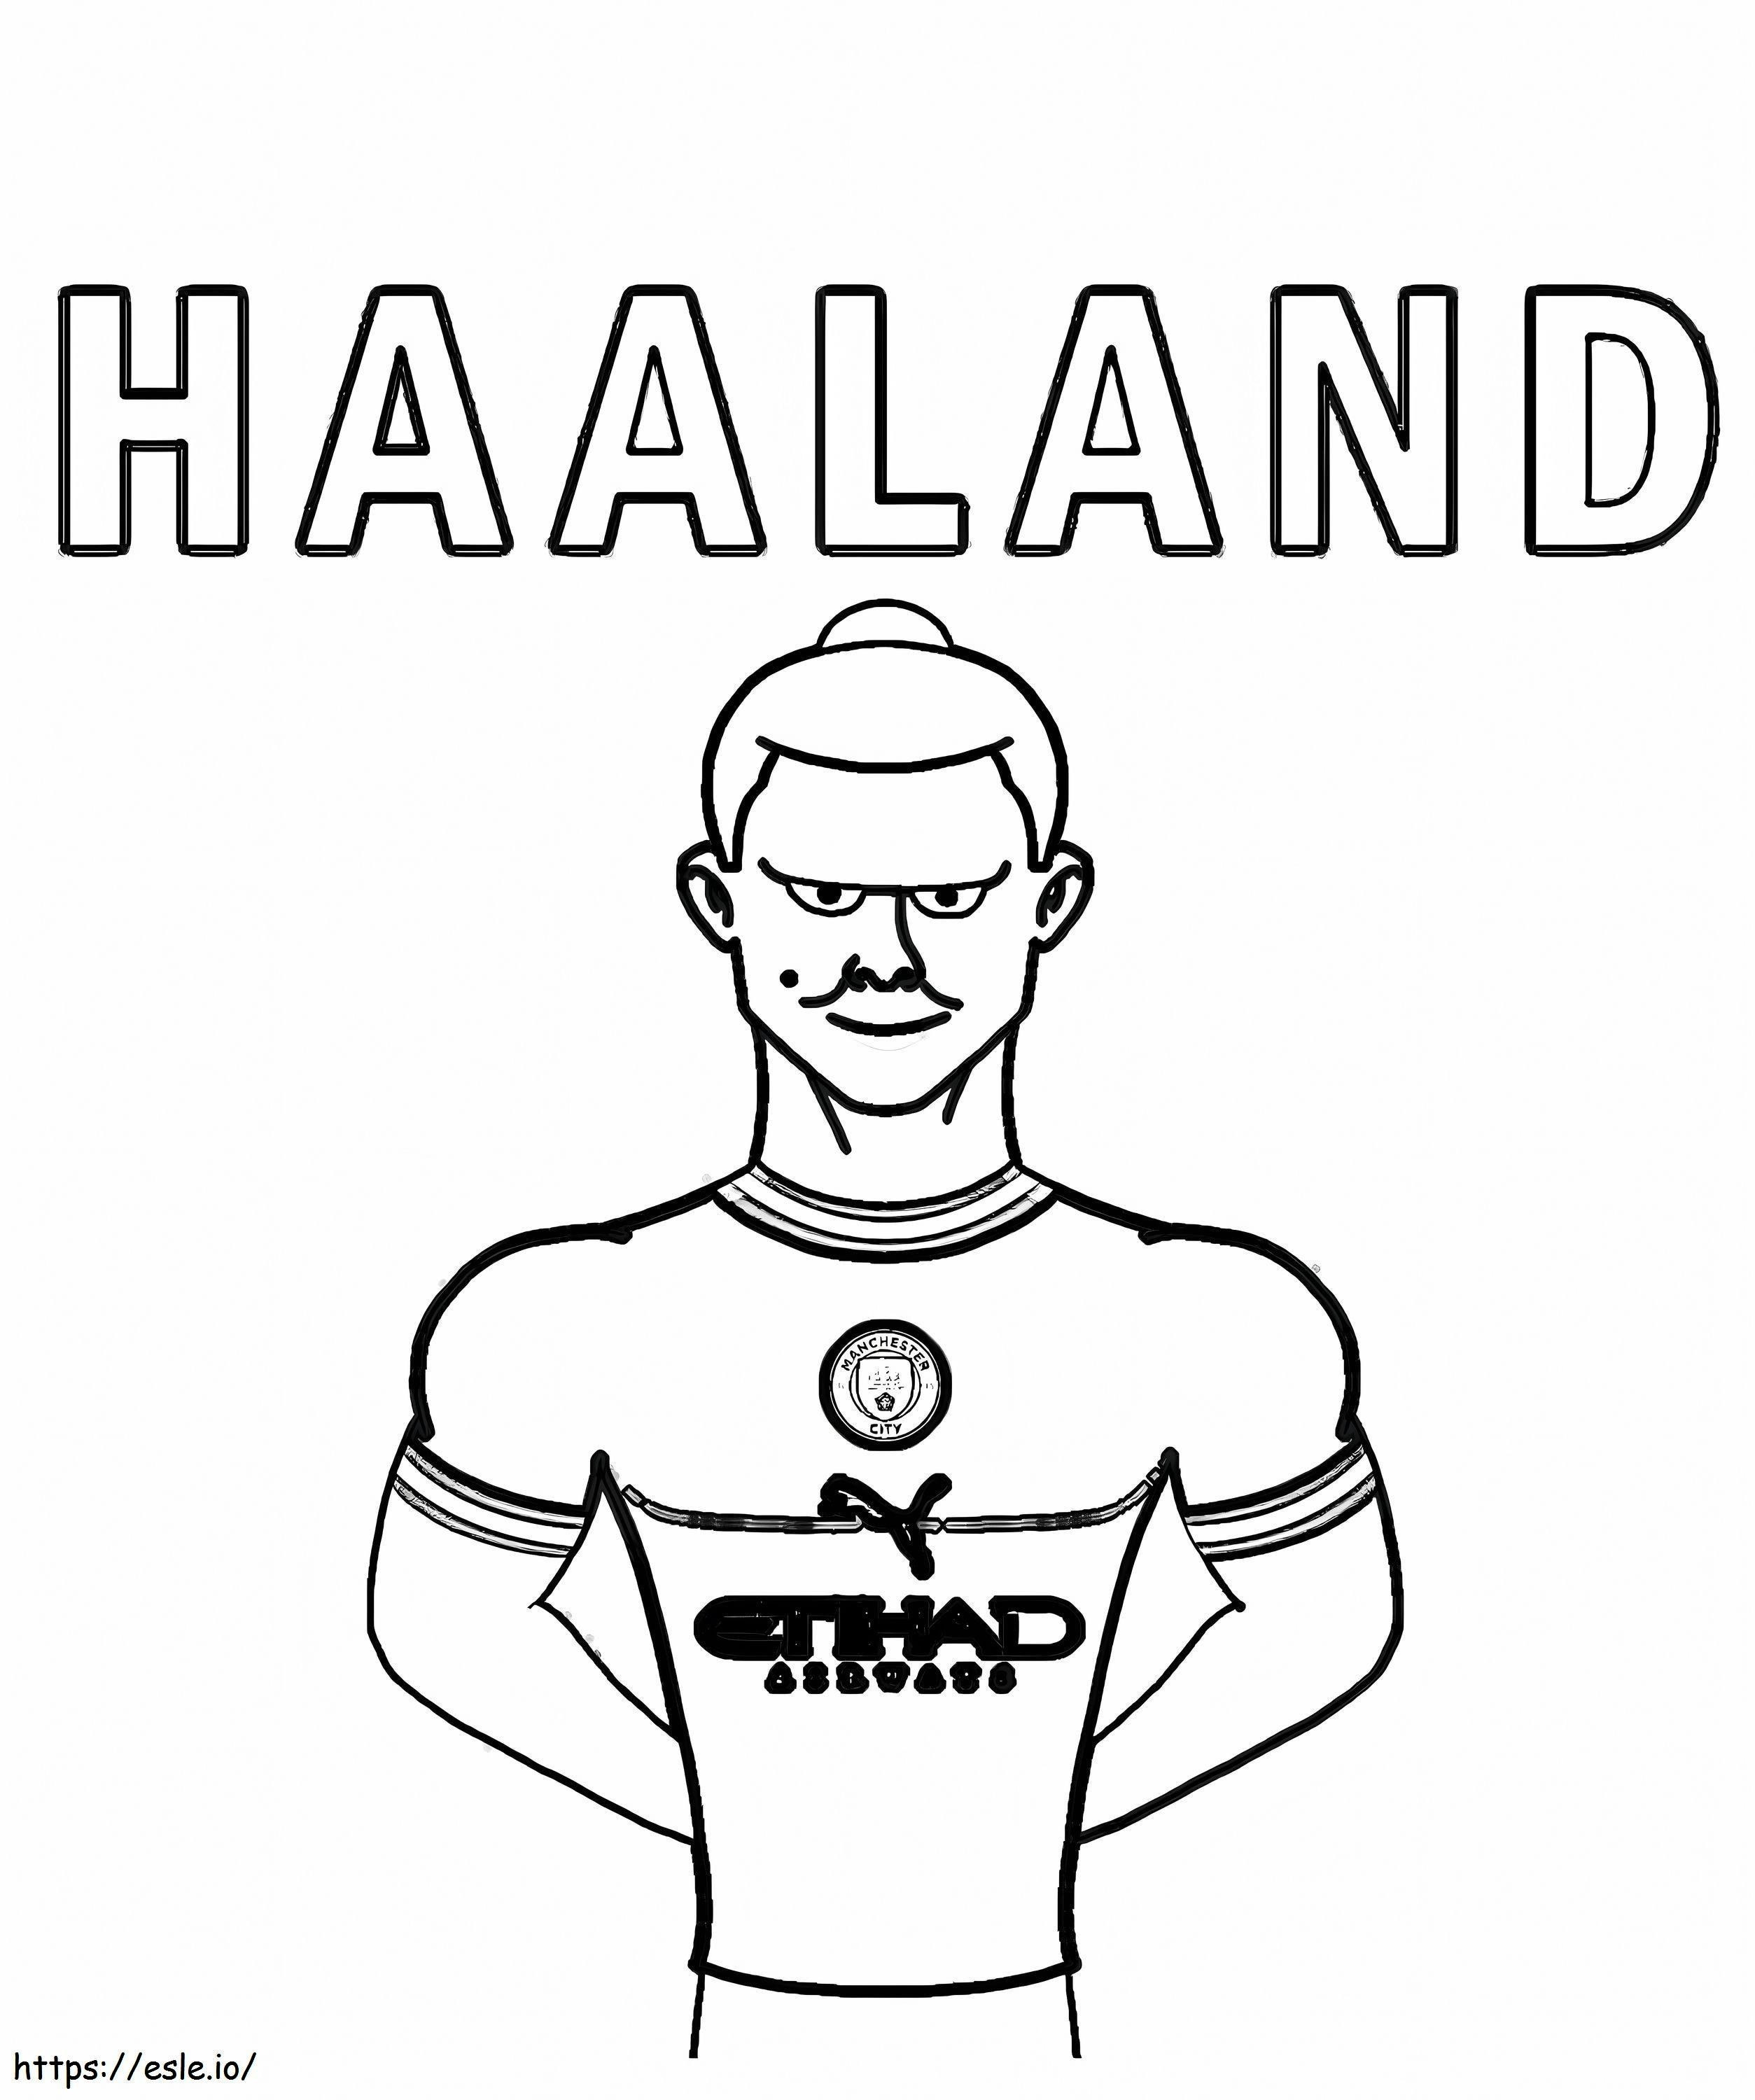 Erling Haaland 3 coloring page